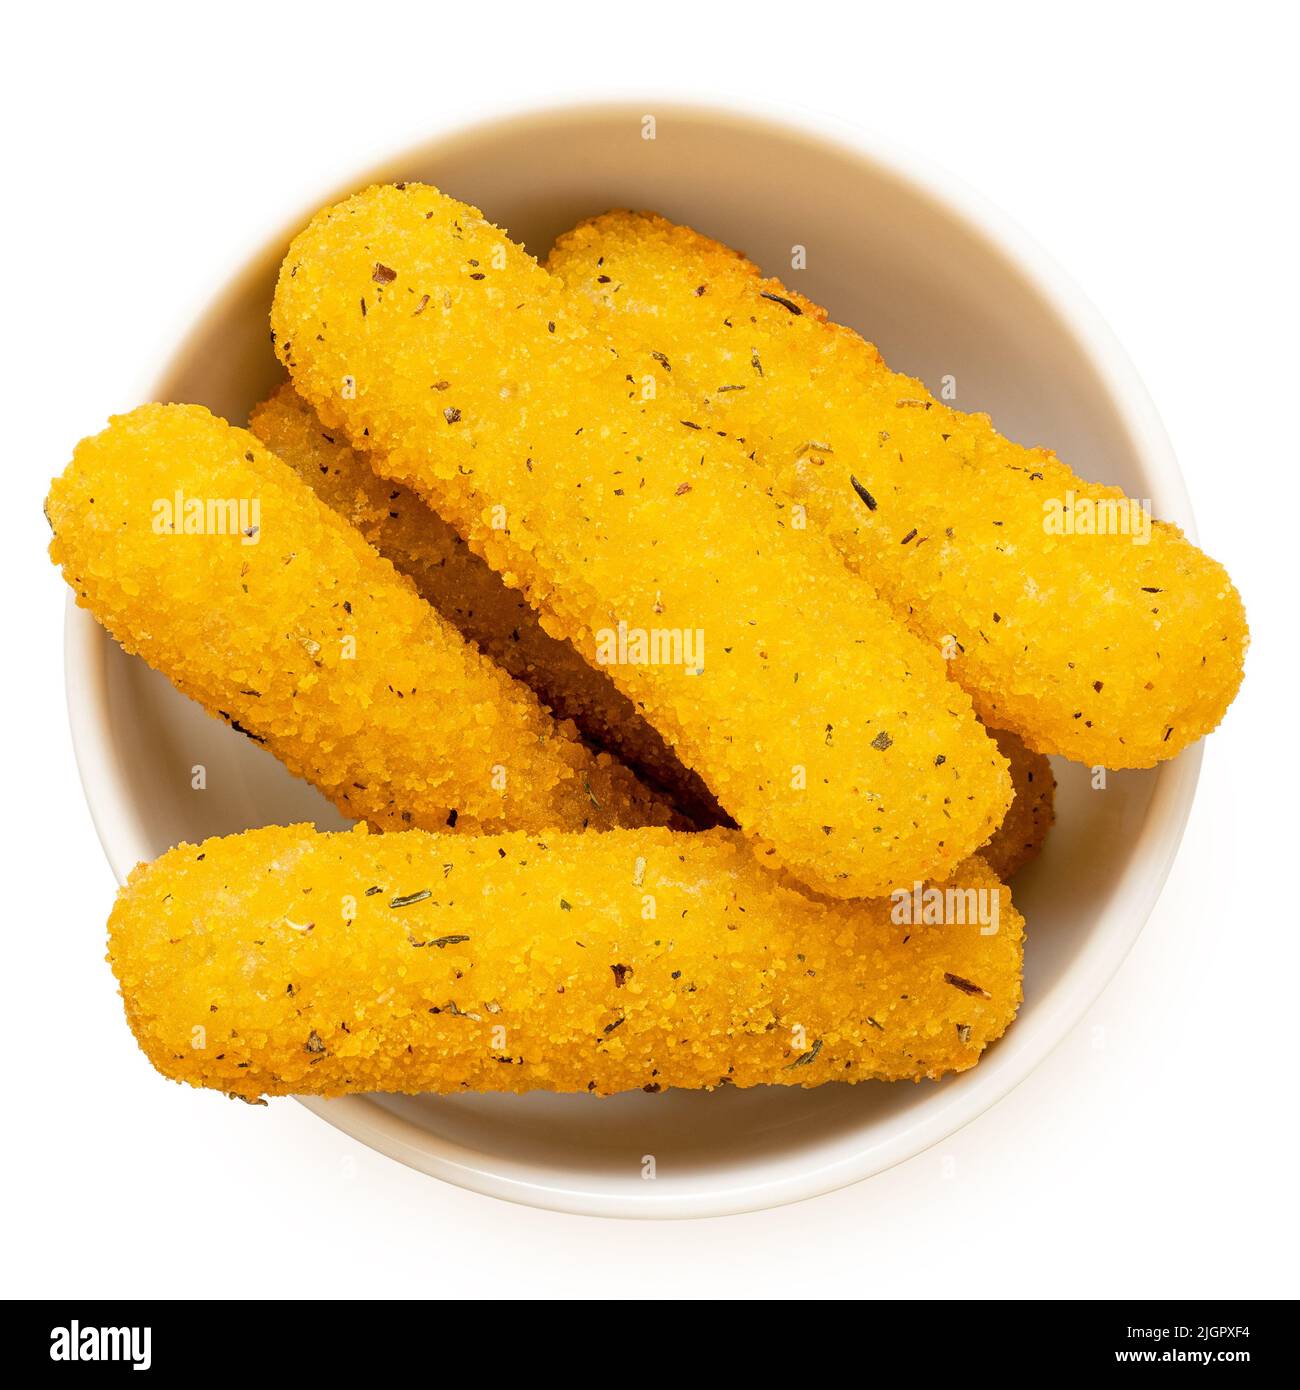 Fried breaded mozzarella sticks with herbs in a white ceramic bowl isolated on white. Top view. Stock Photo